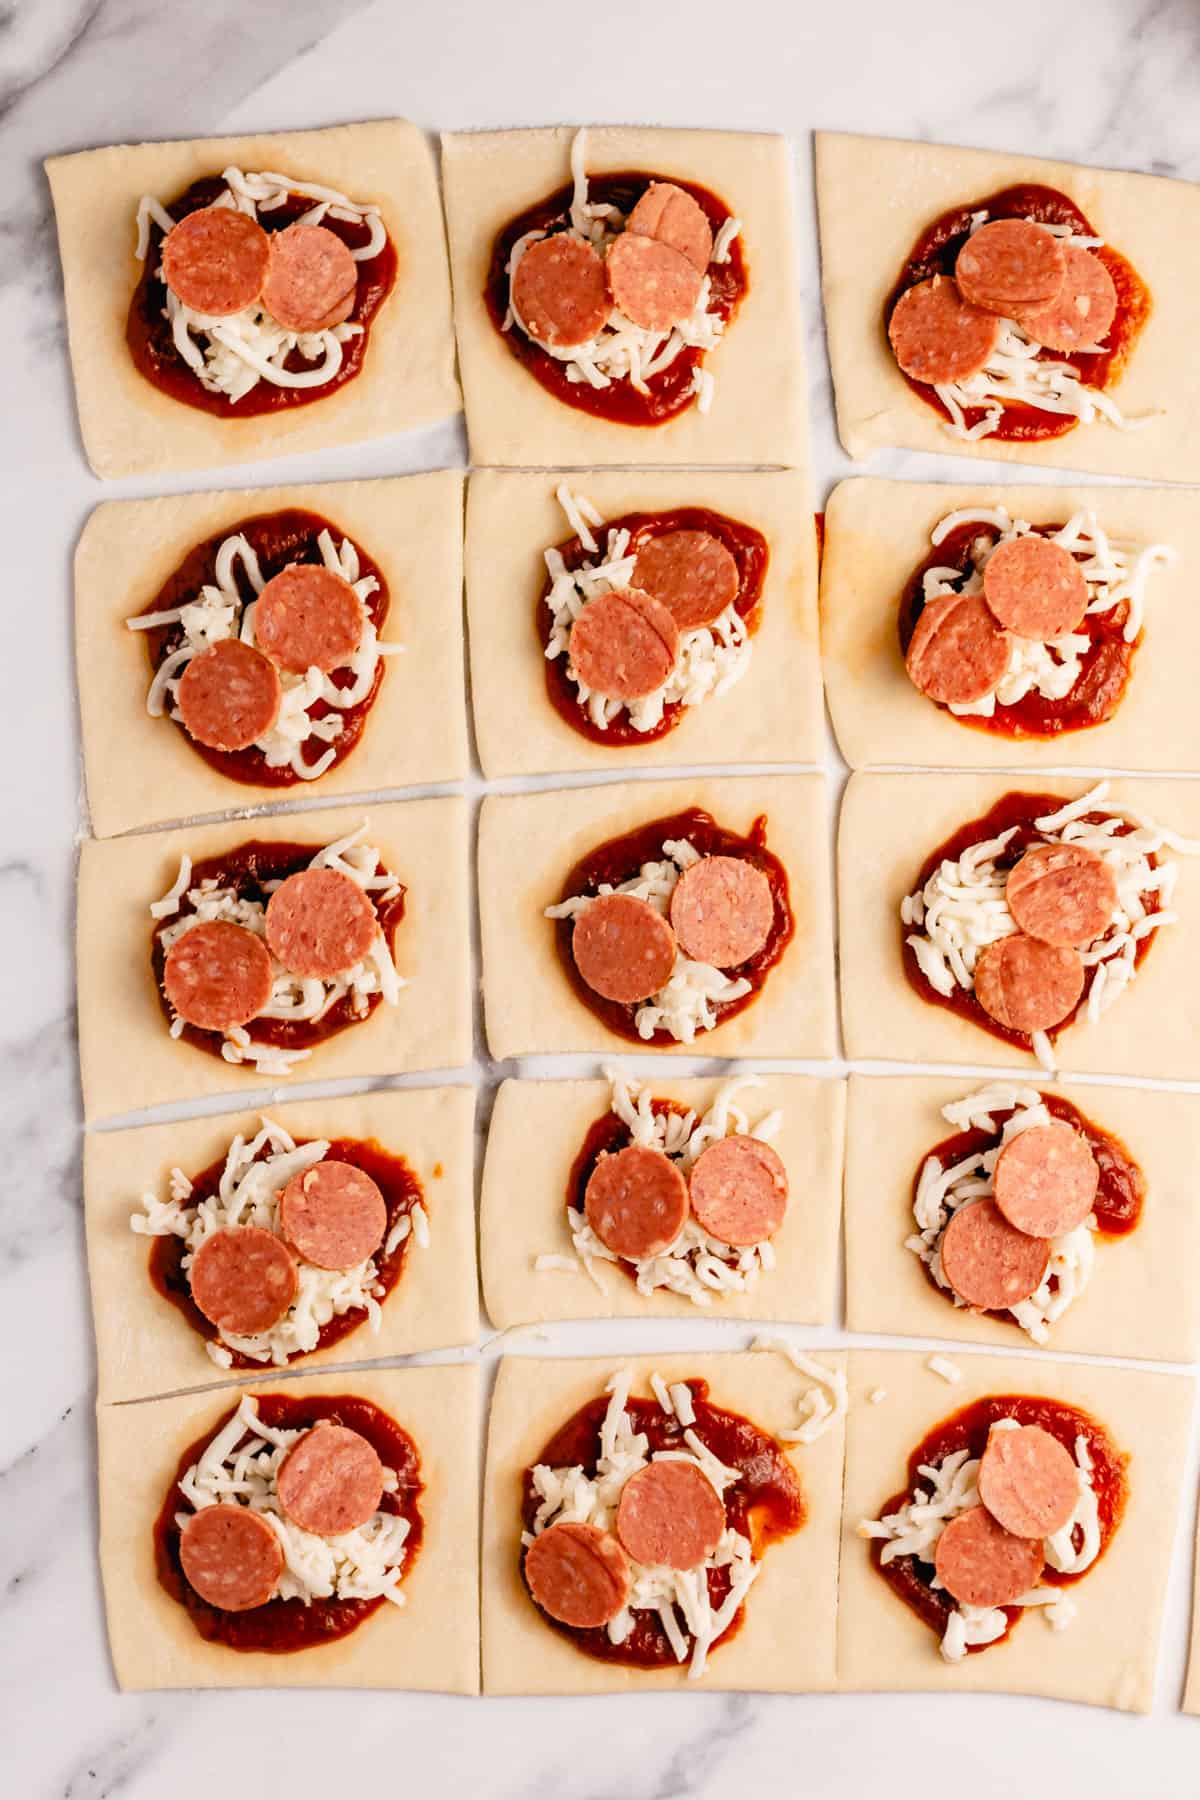 pizza dough squares topped with pizza sauce, mozzarella cheese, and pepperoni slices